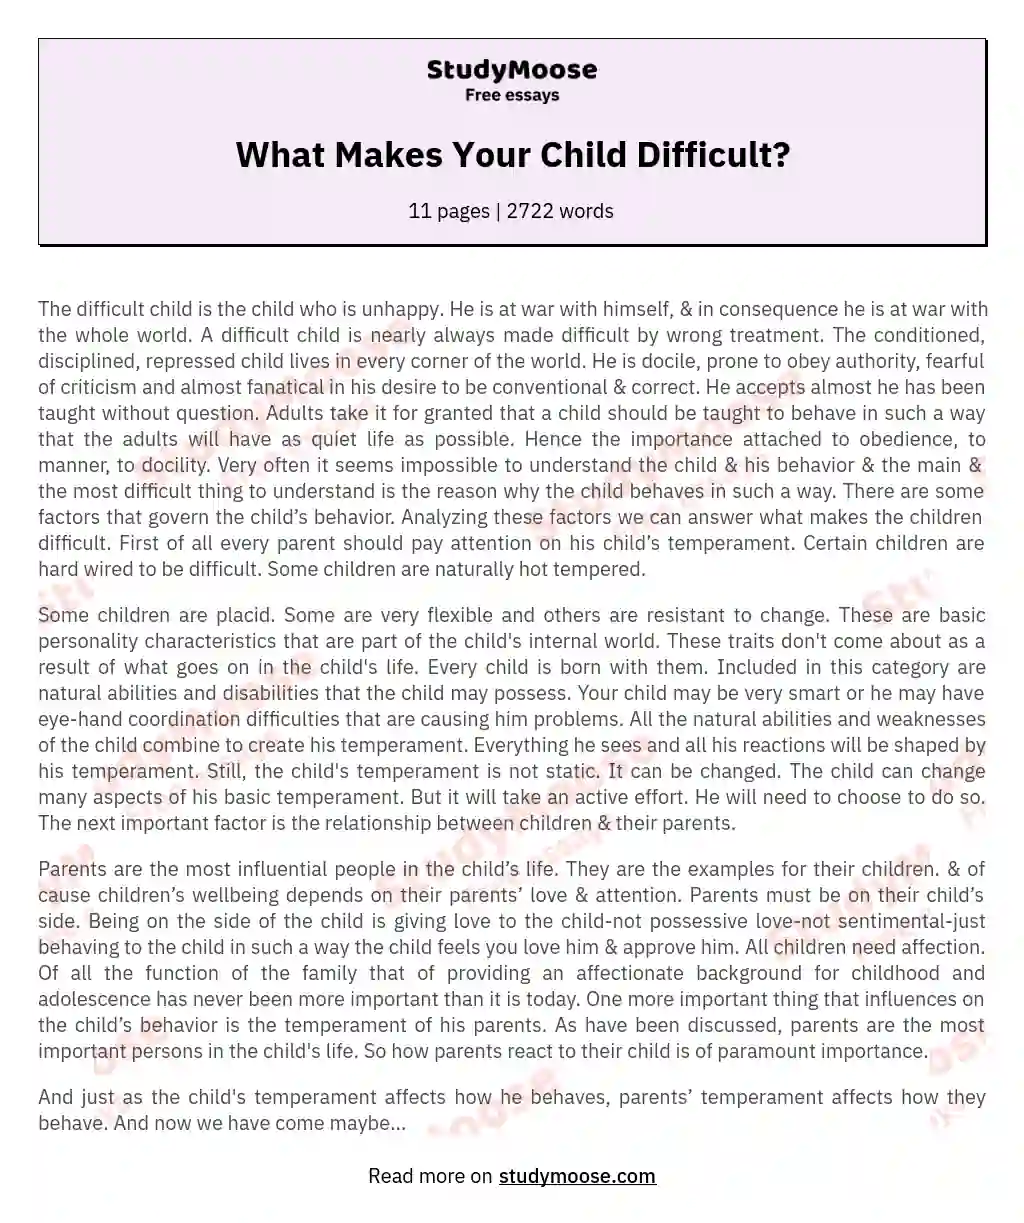 What Makes Your Child Difficult? essay